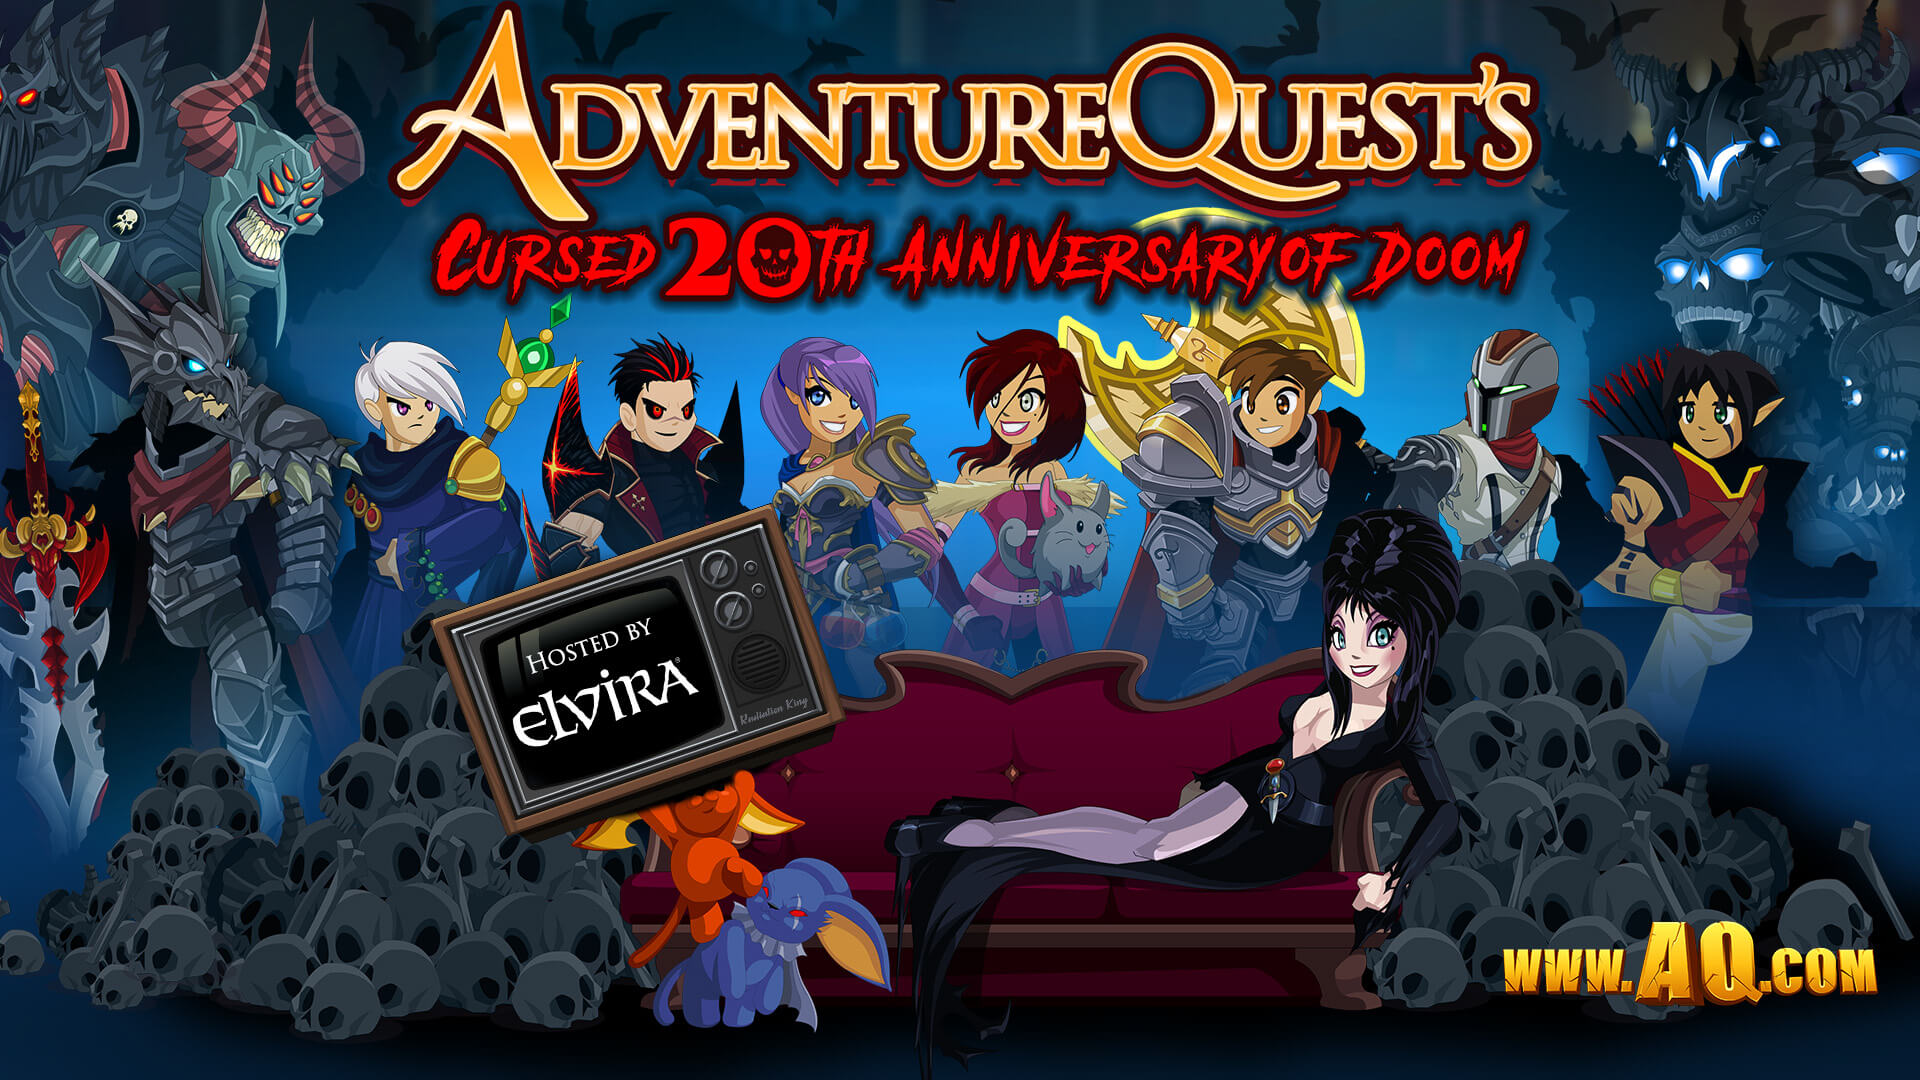 Play the cursed 20th Anniverary Event of Doom